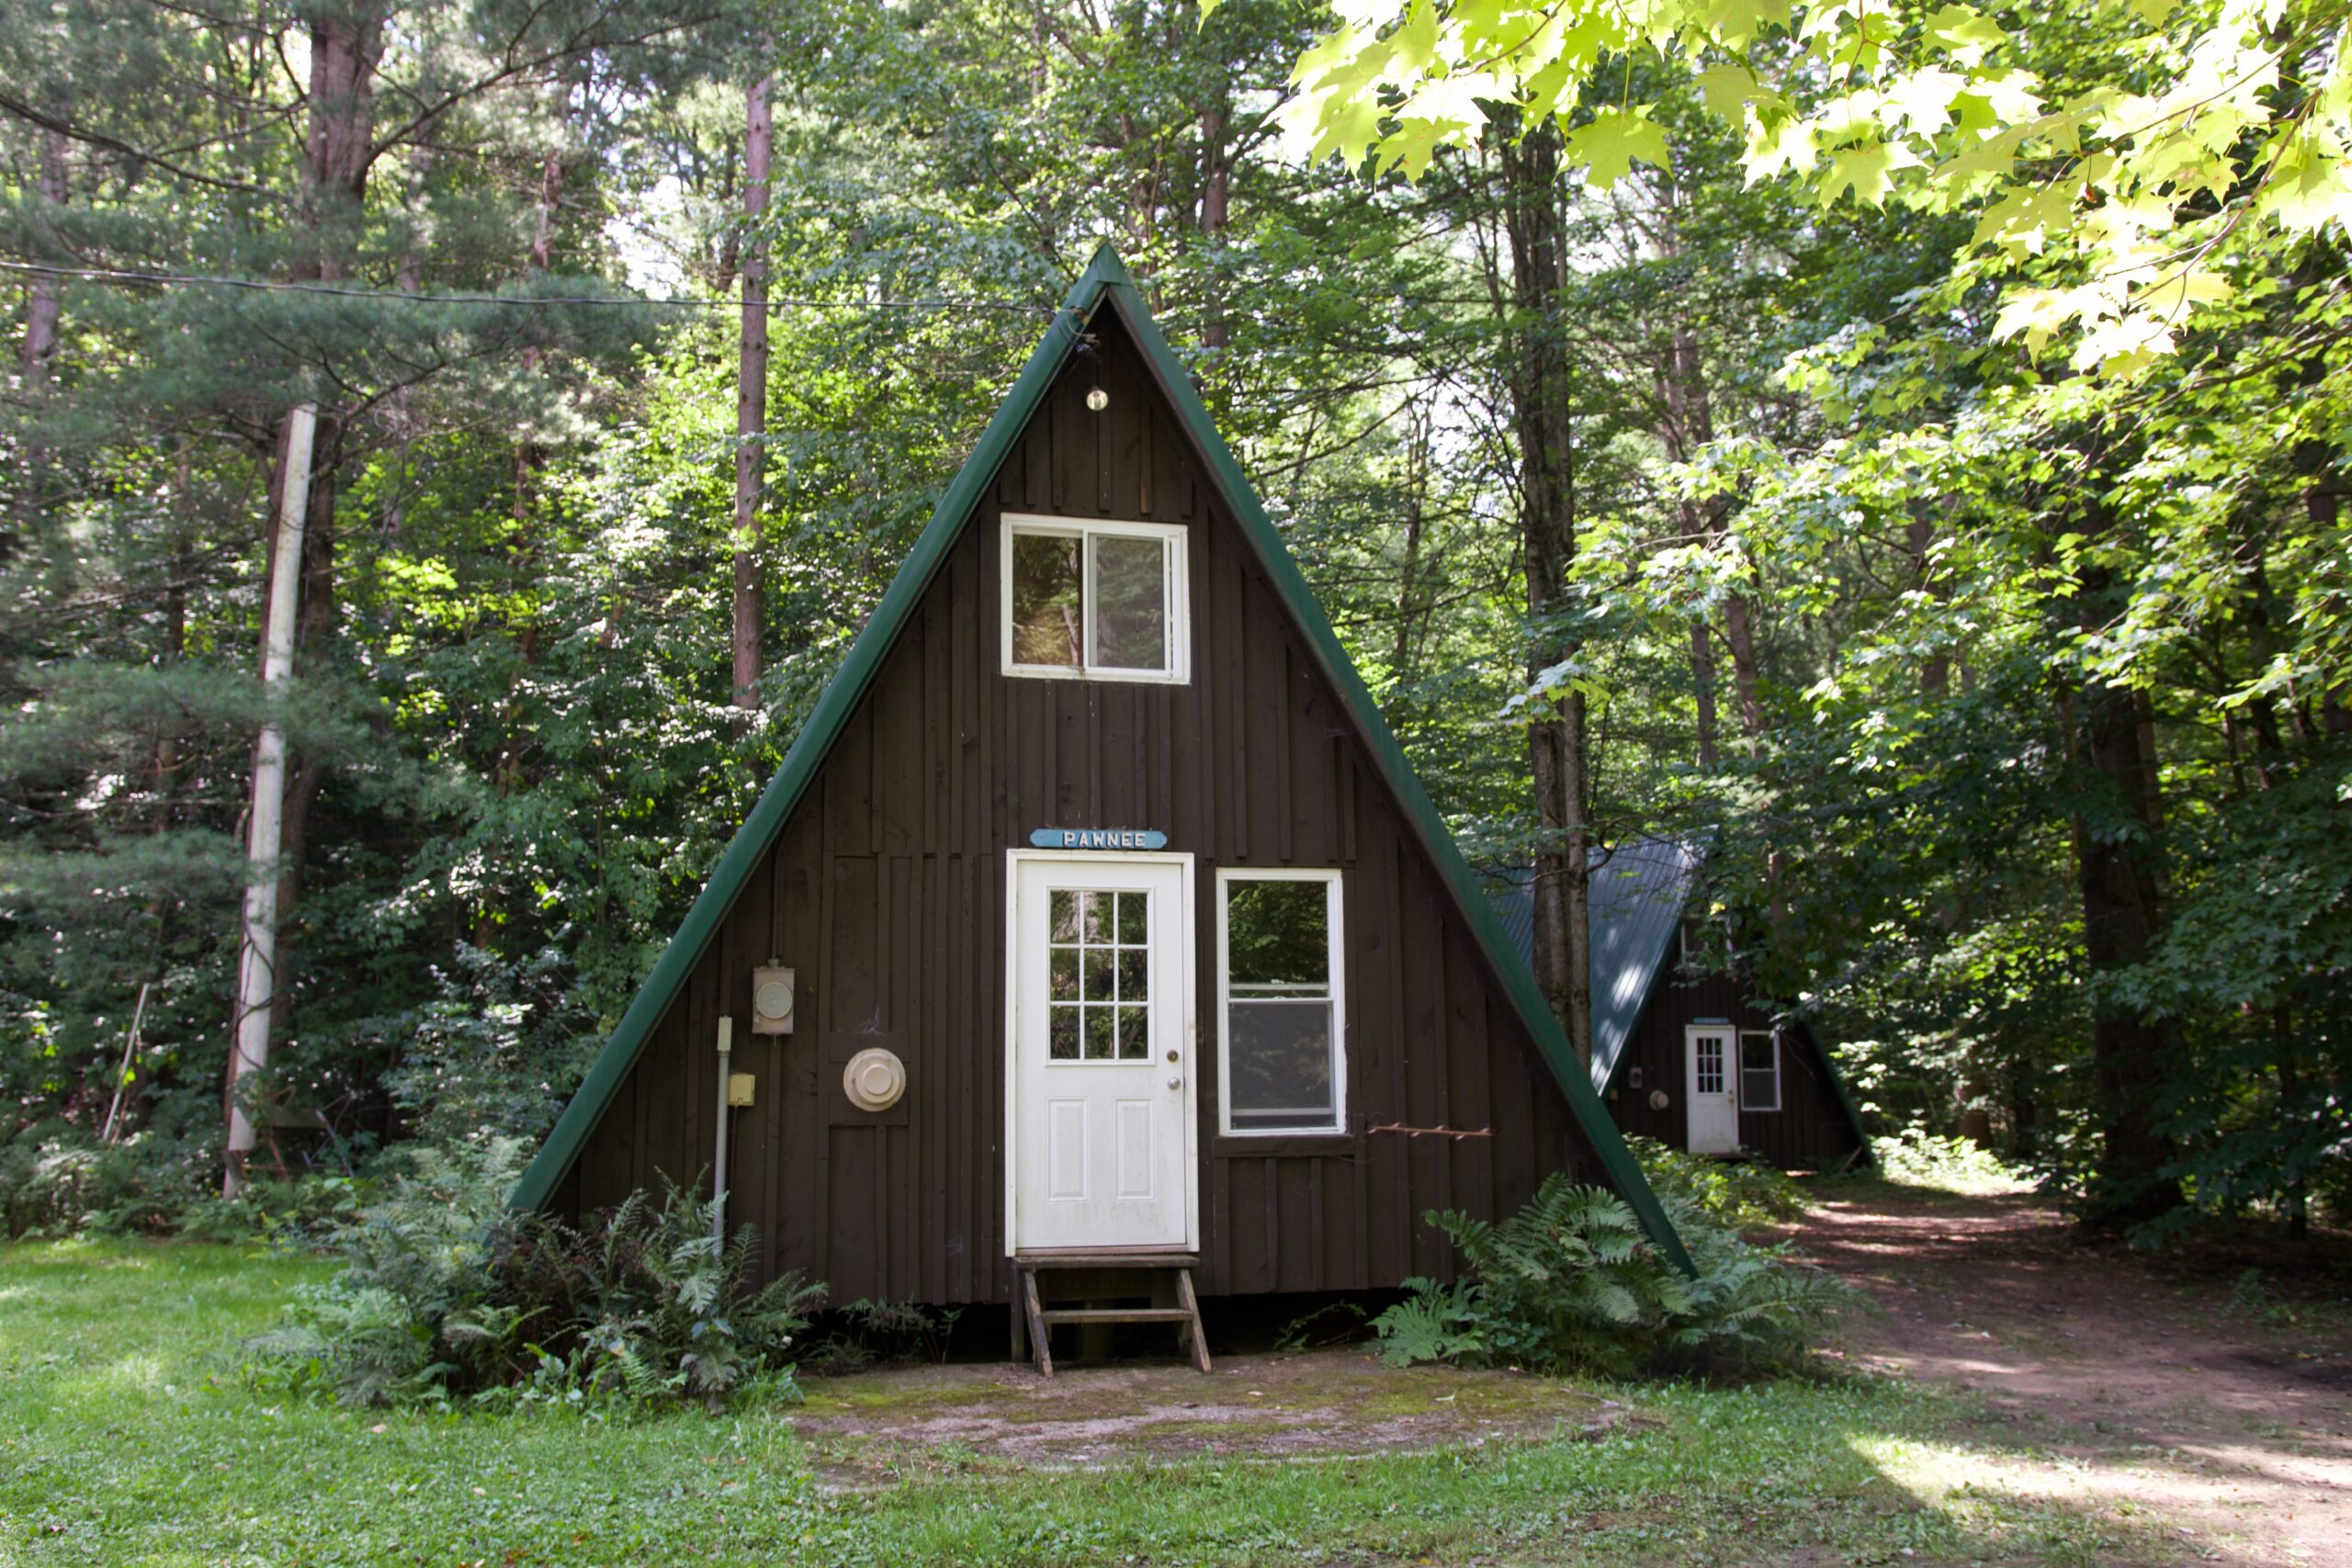 We have indoor sleeping for 30 people between 3 A-Frame cabins, located at the beginning of Camp Kingsley. These buildings offer heated sleeping space with electric plugs. Beds in these a-frames are first-come, first-served. During warmer months they also have bathrooms with showers.